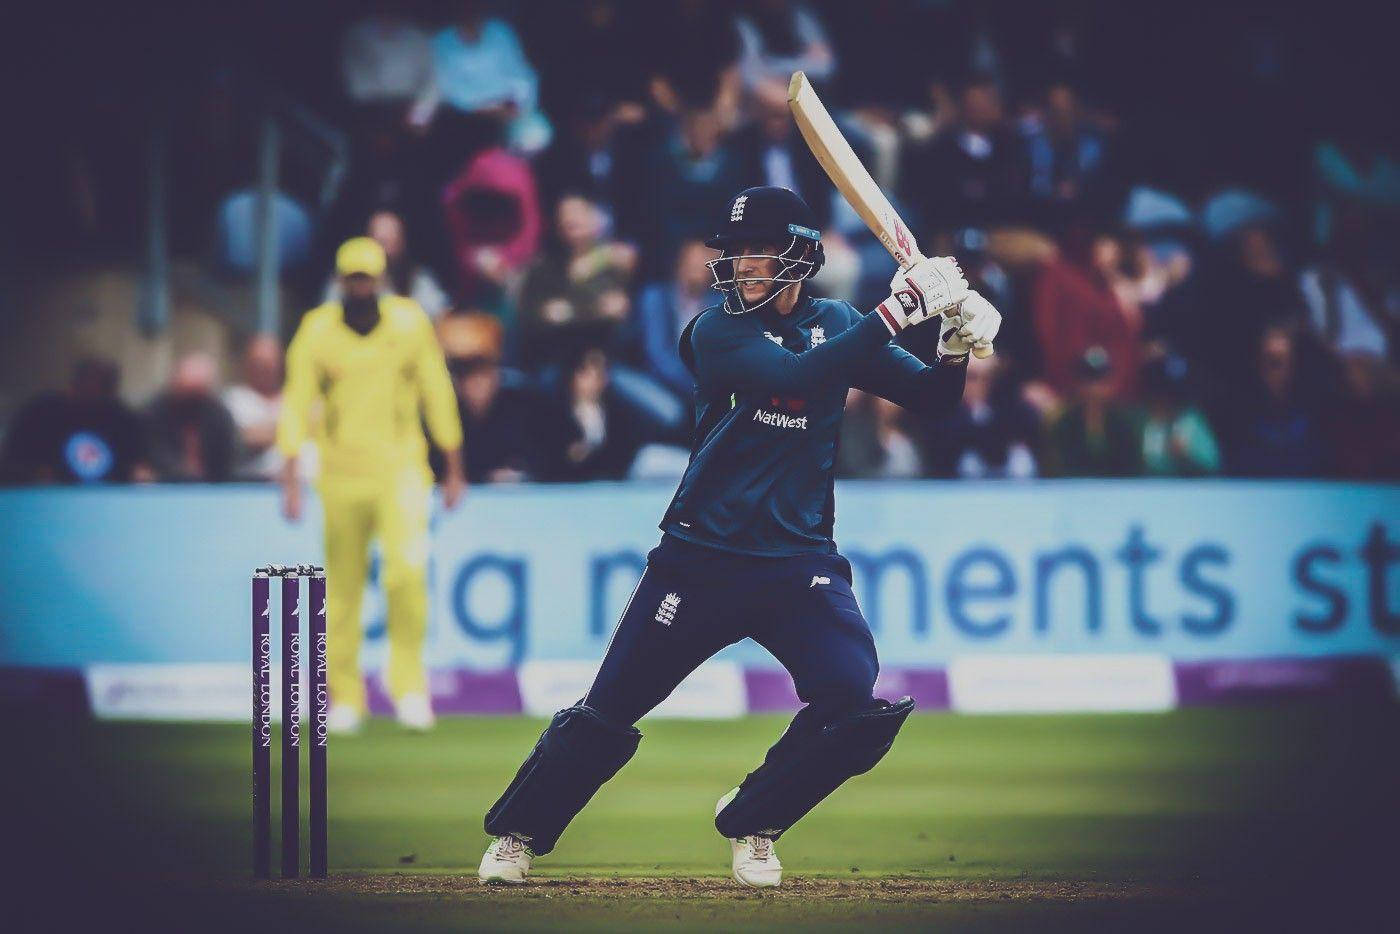 Majestic Joe Root In Action